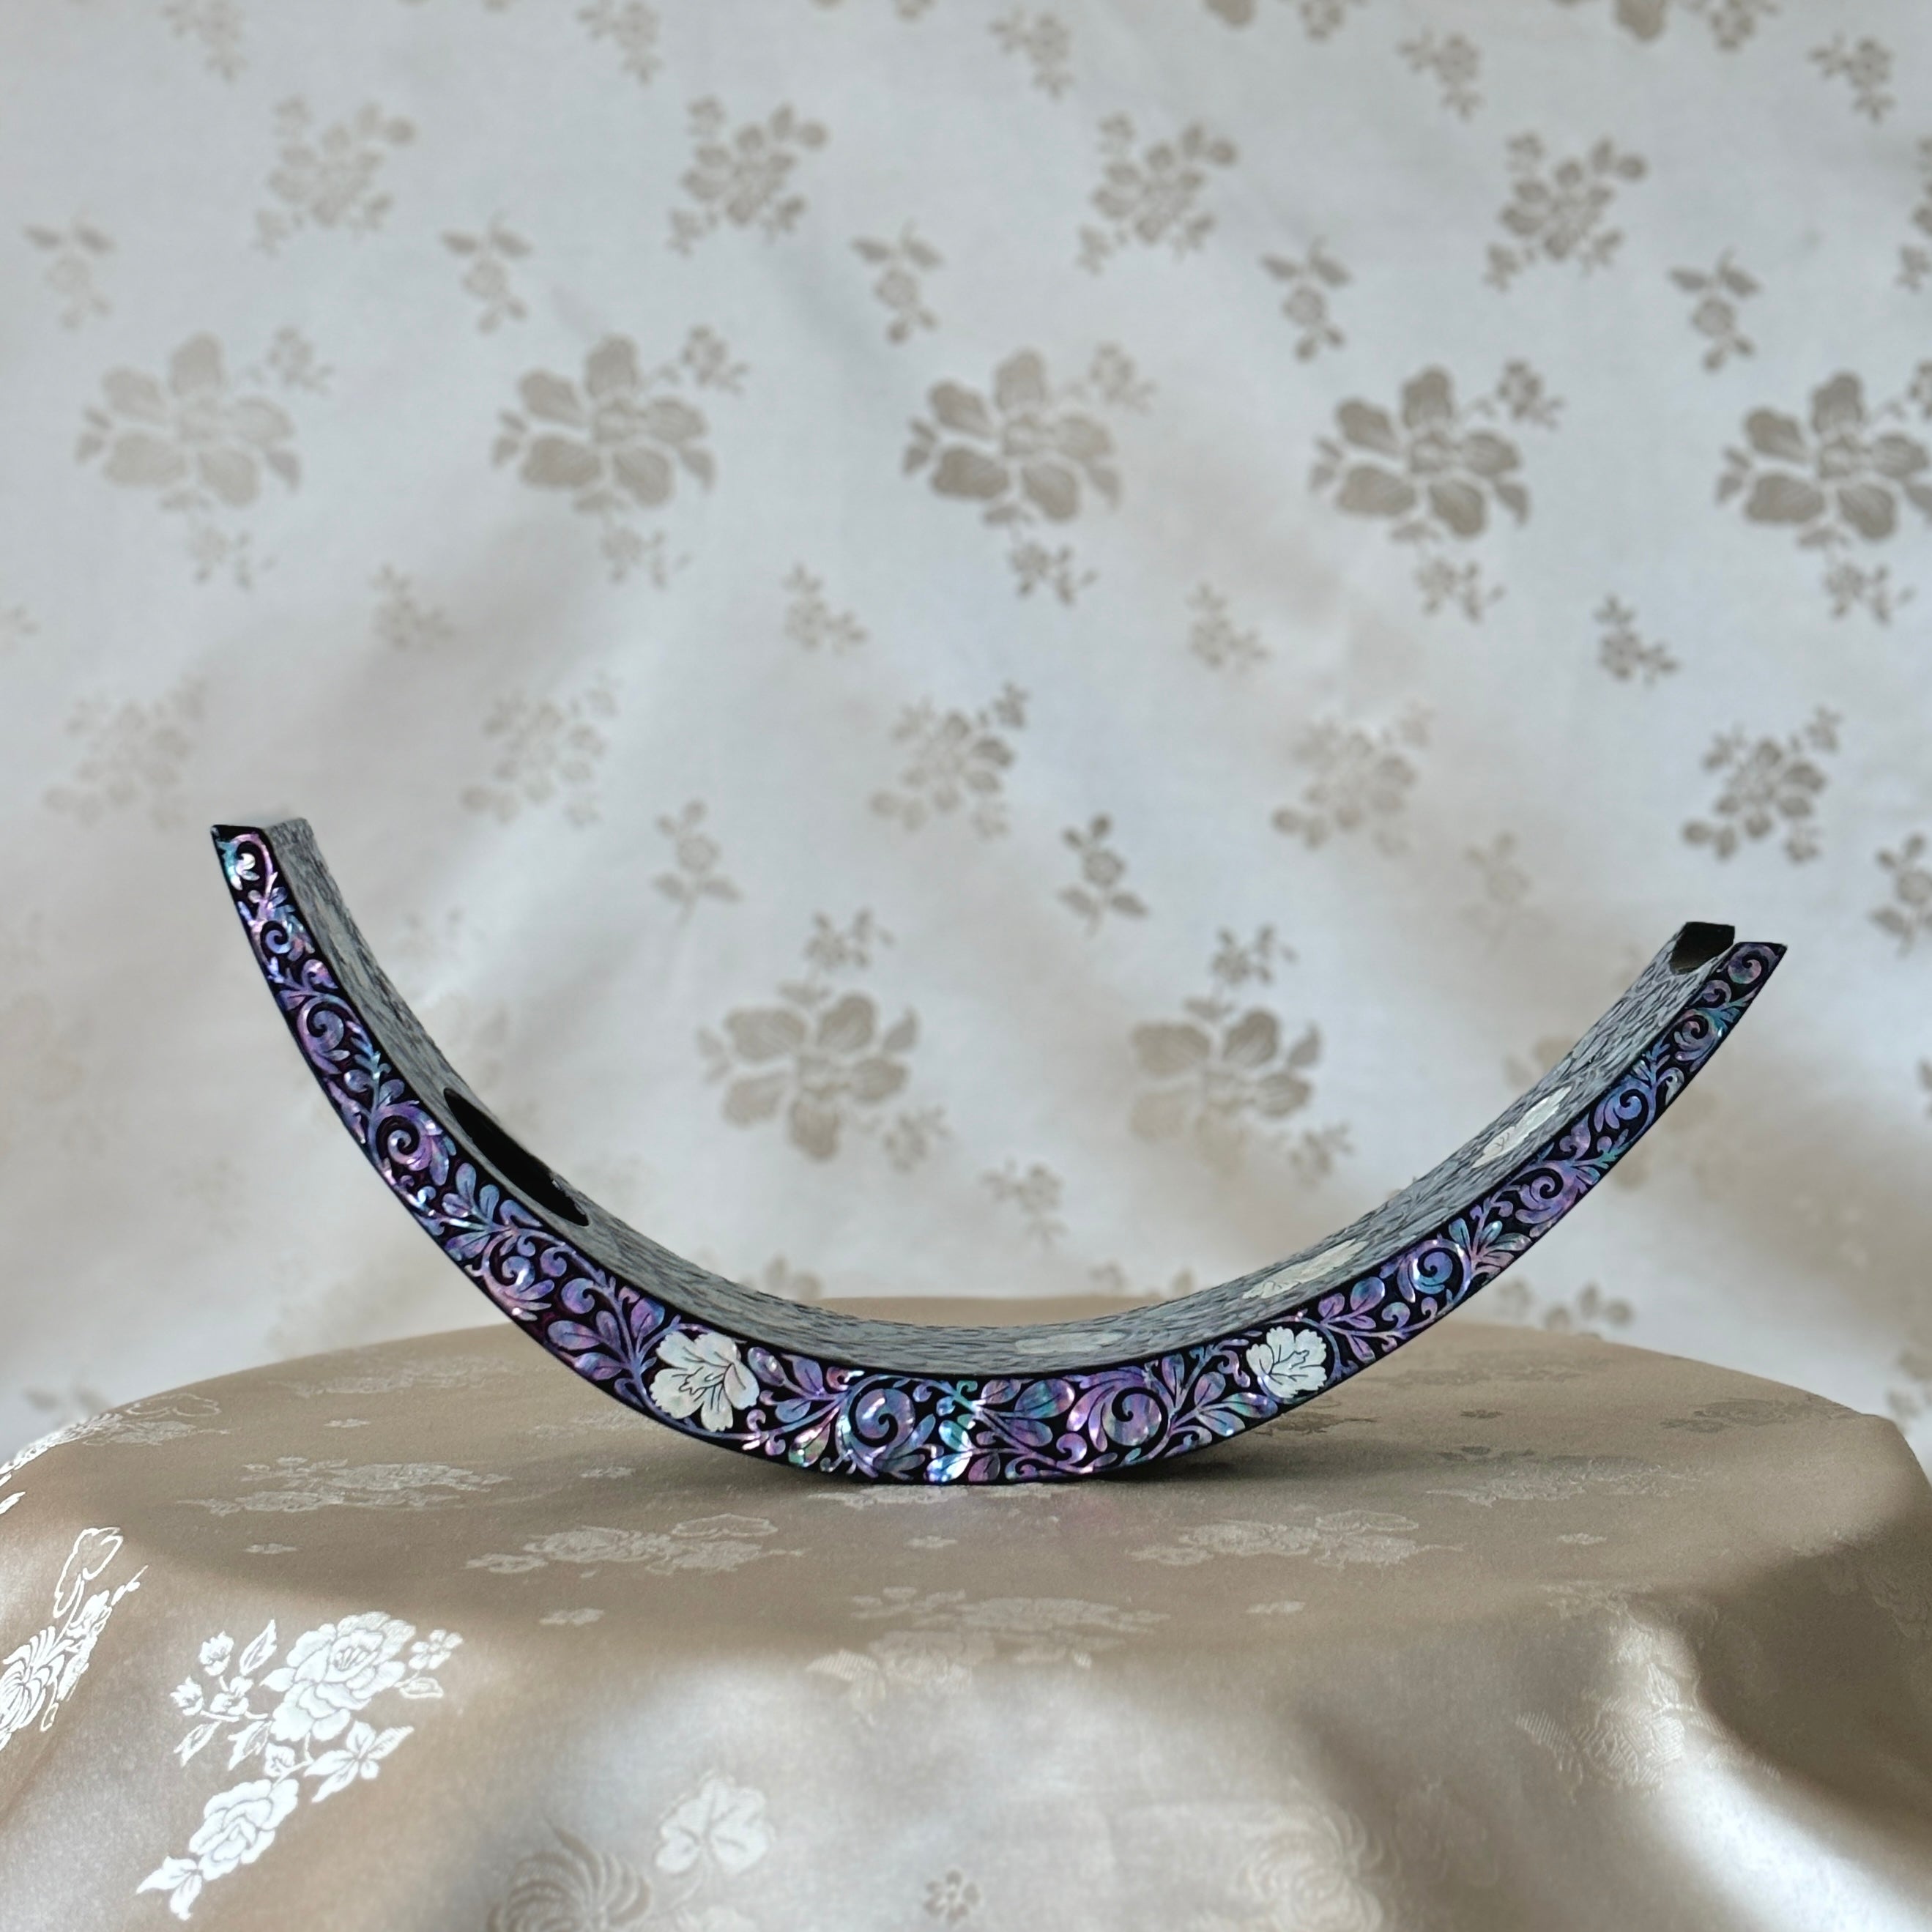 Front view of a Korean traditional handmade mother of pearl wine holder with intricate plum blossom design.